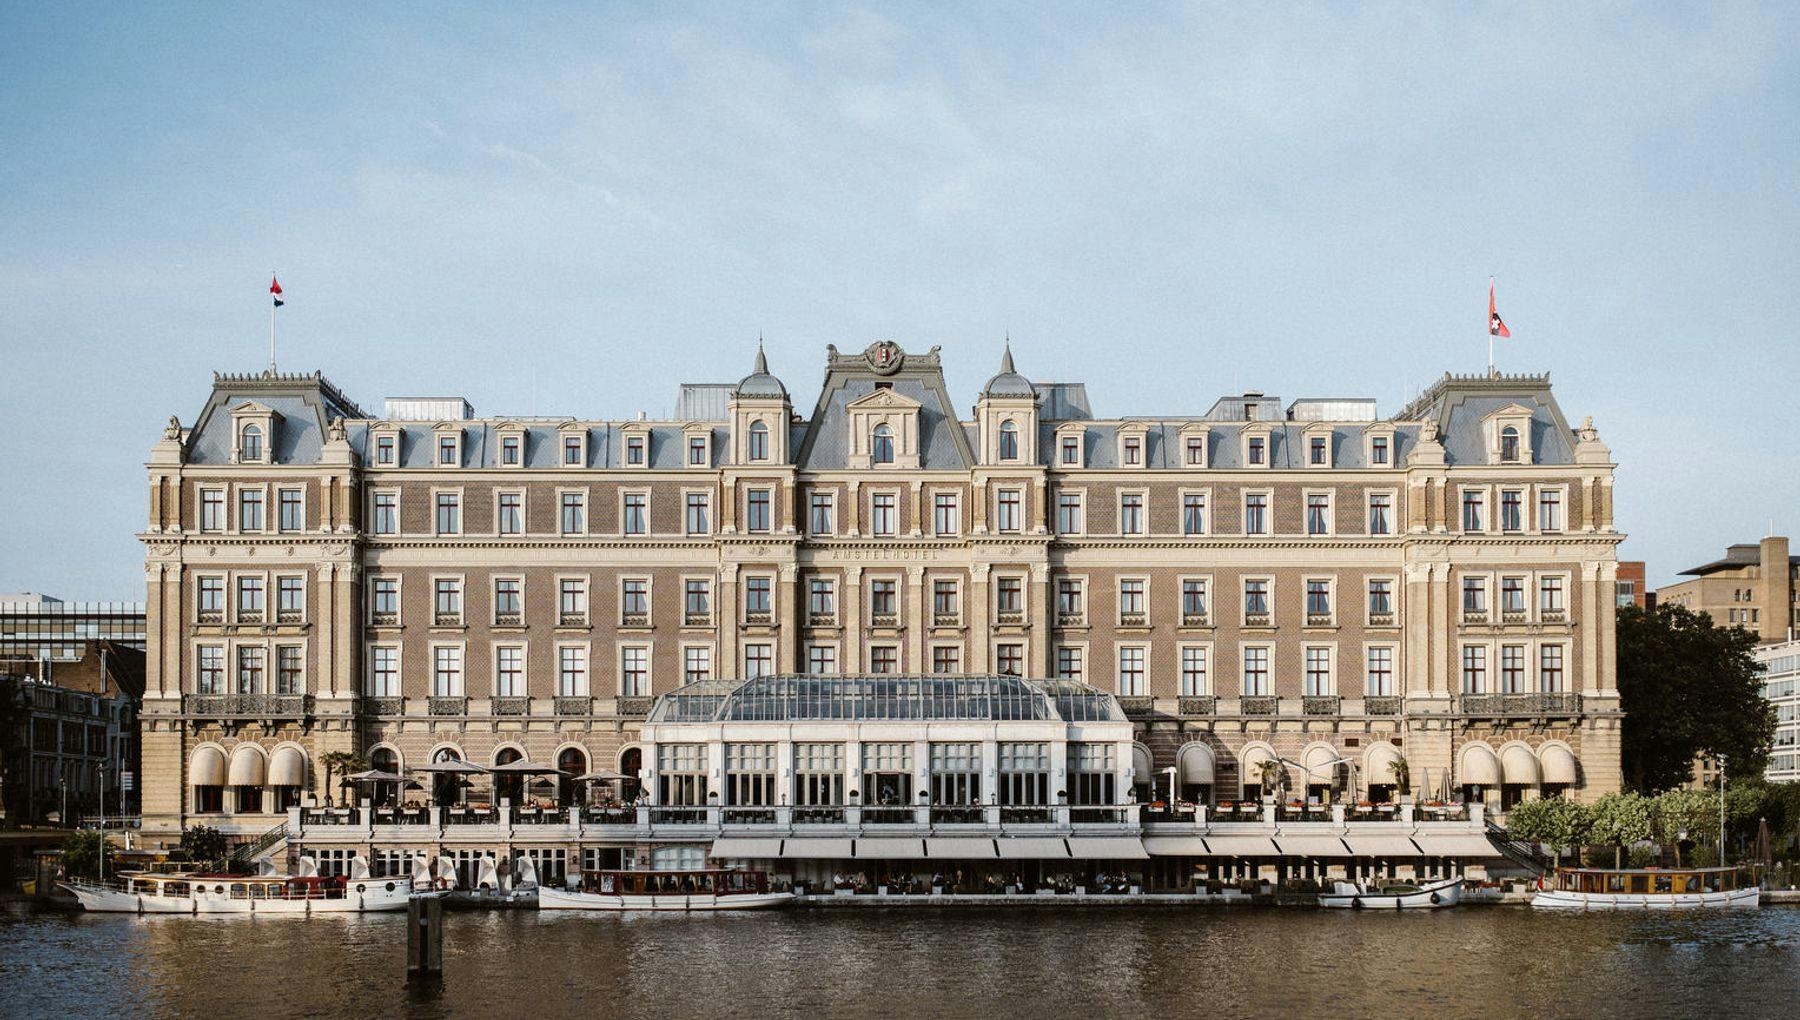 Amstel hotel, view from the water.